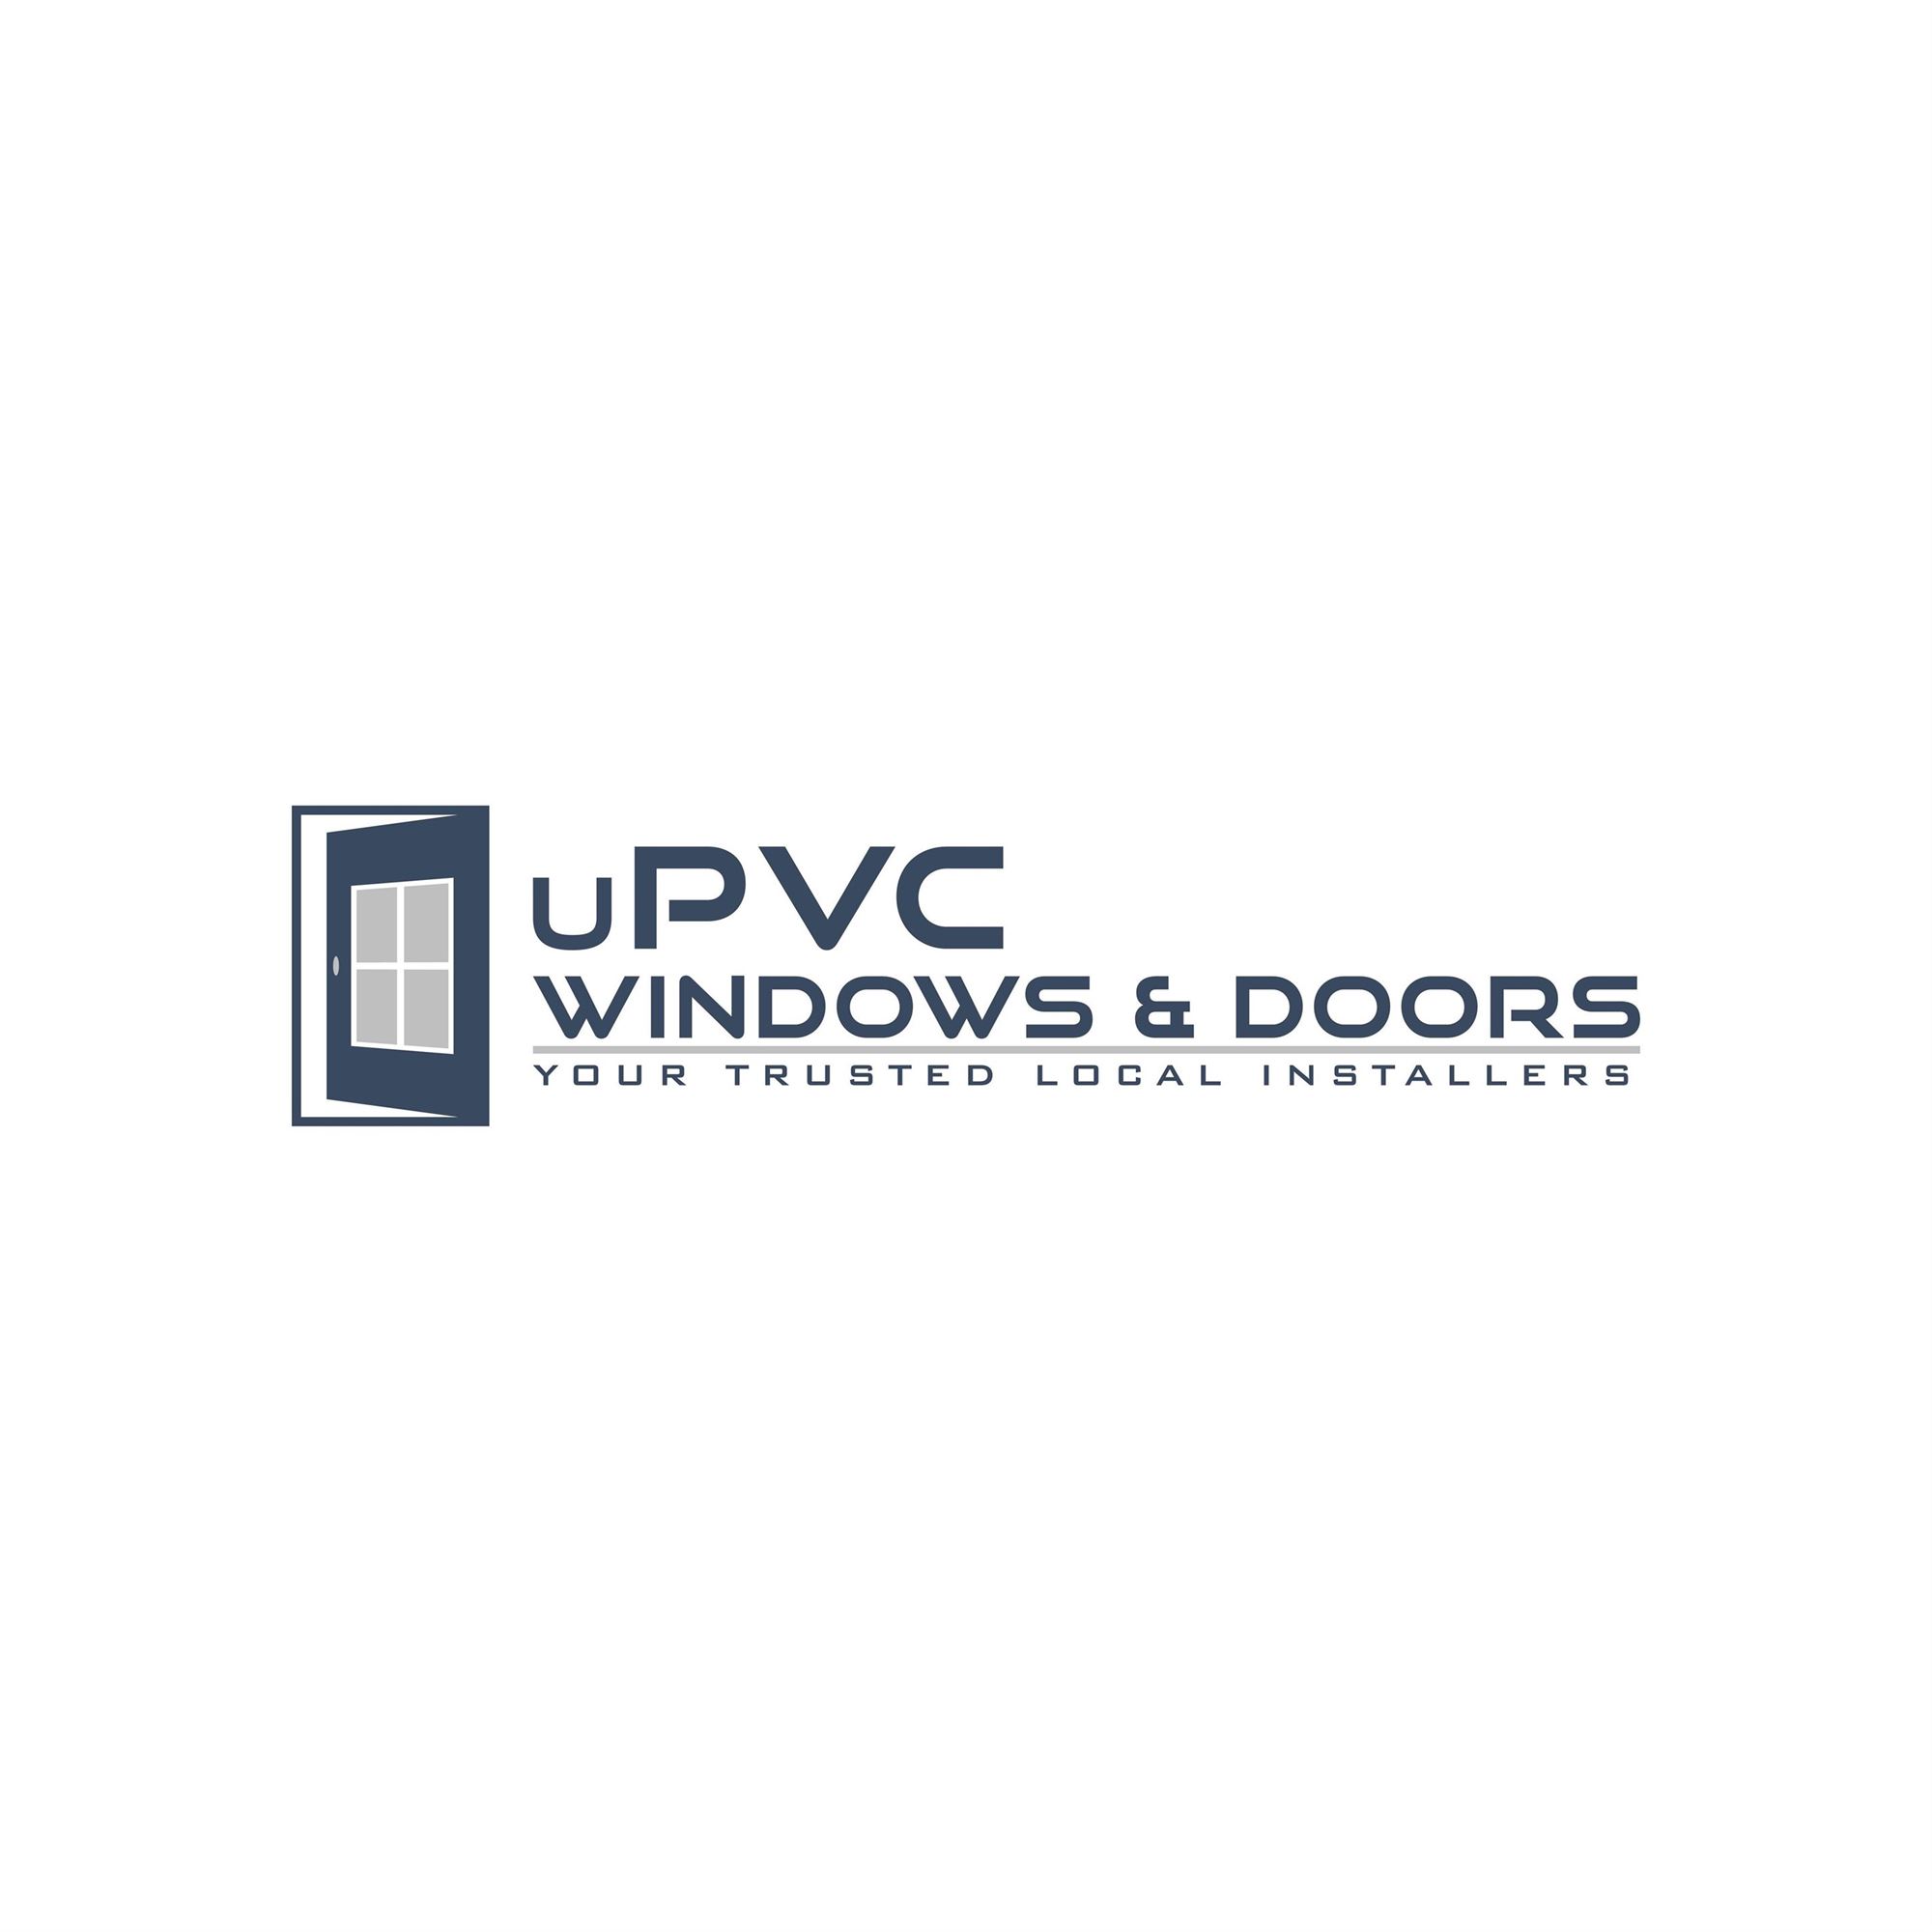 uPVC Windows & Doors Chelmsford Has Launched a New Website for the Residents of Chelmsford, England